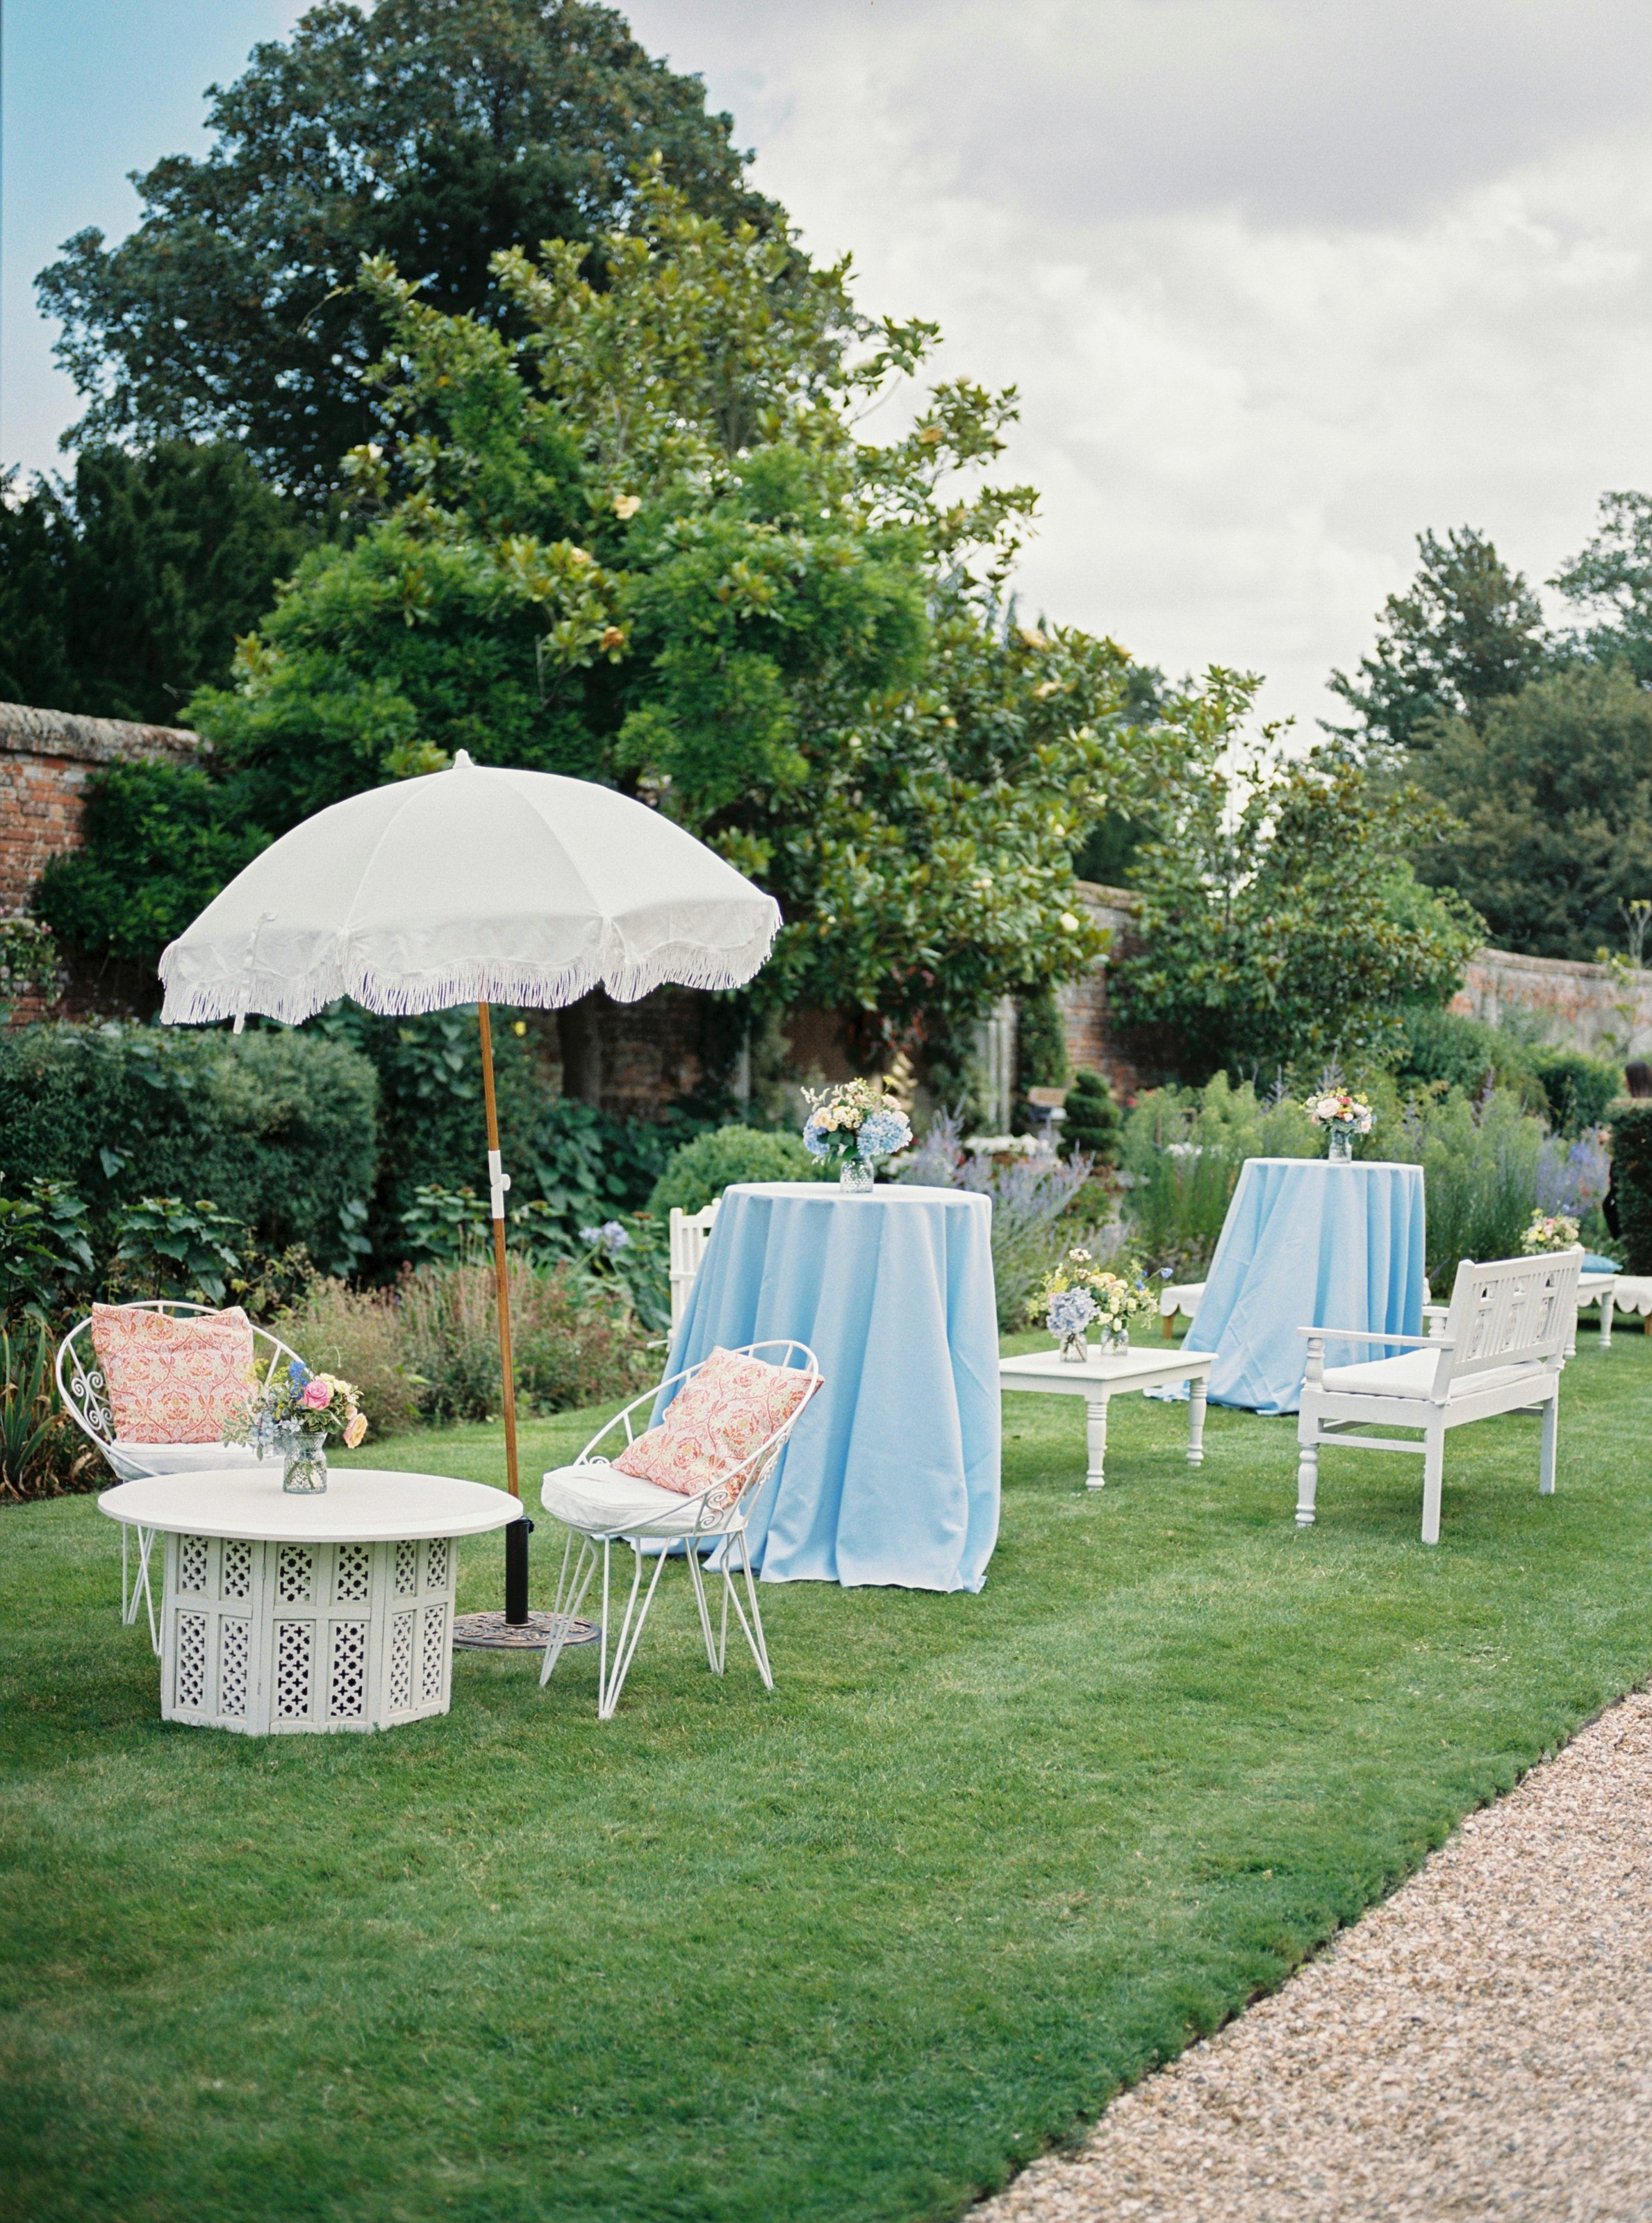  outside seating for wedding guests with parasols 